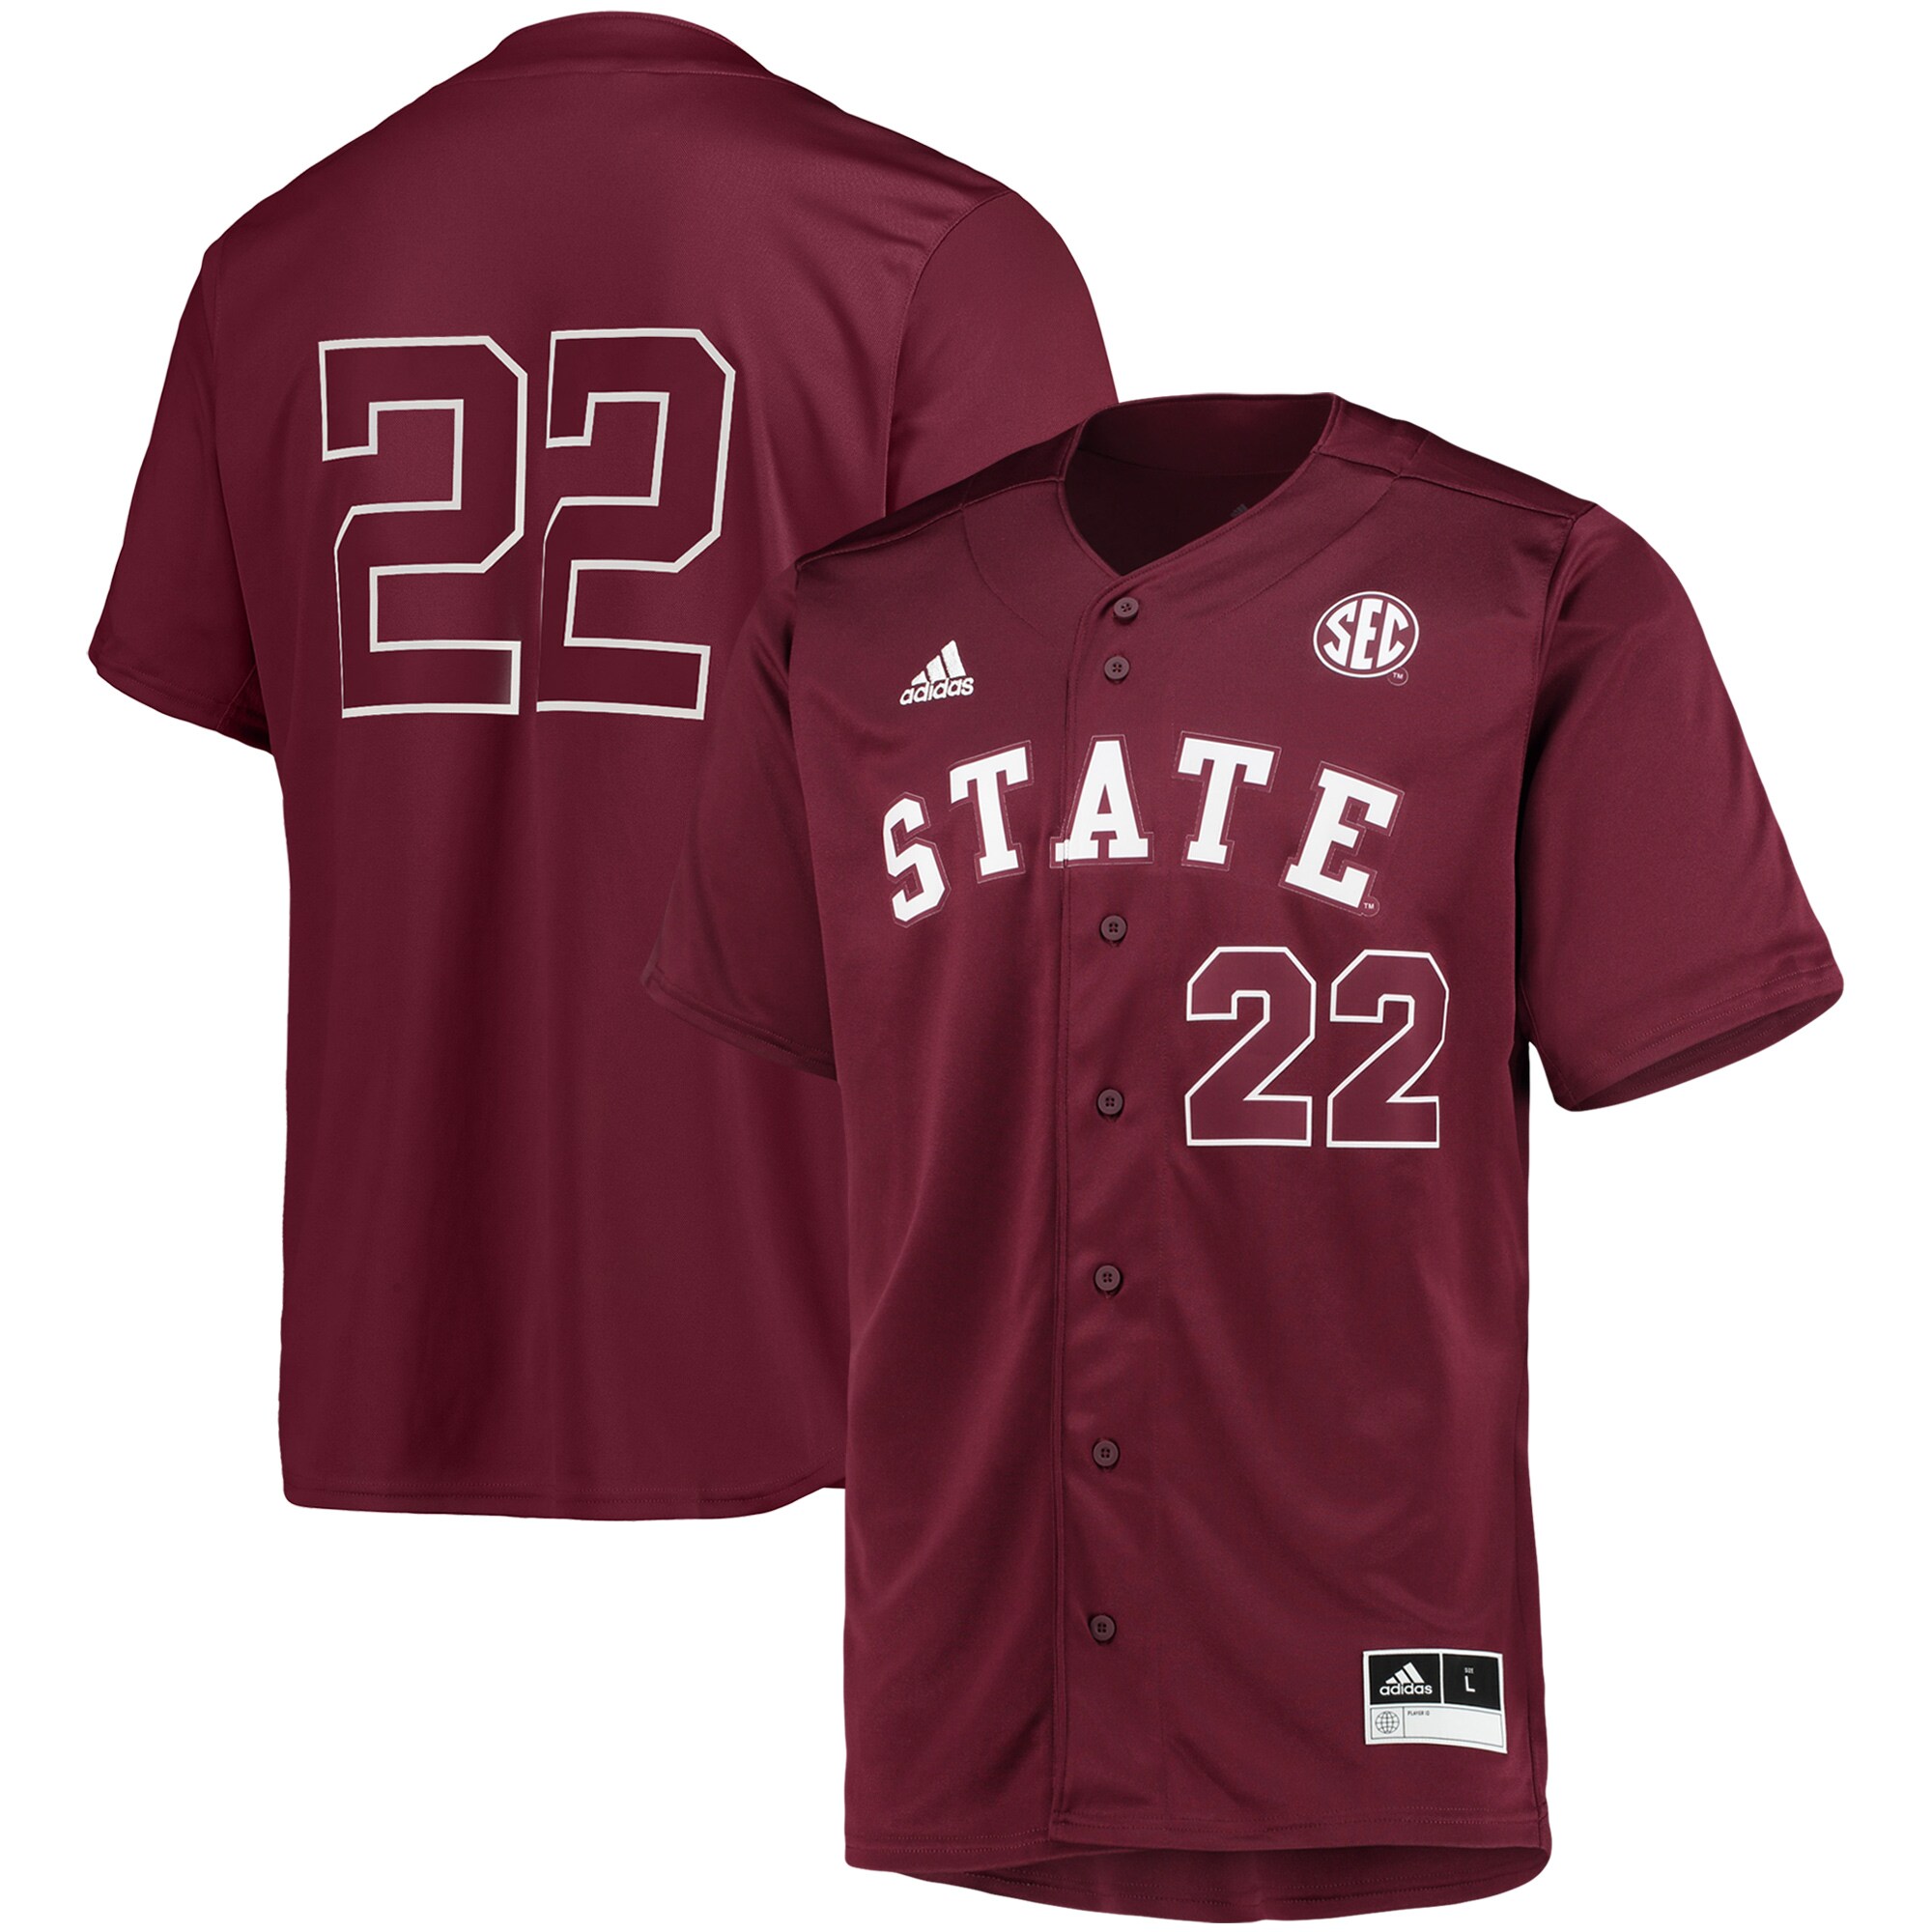 #22 Mississippi State Bulldogs   Button-Up Baseball Jersey - Maroon For Youth Women Men